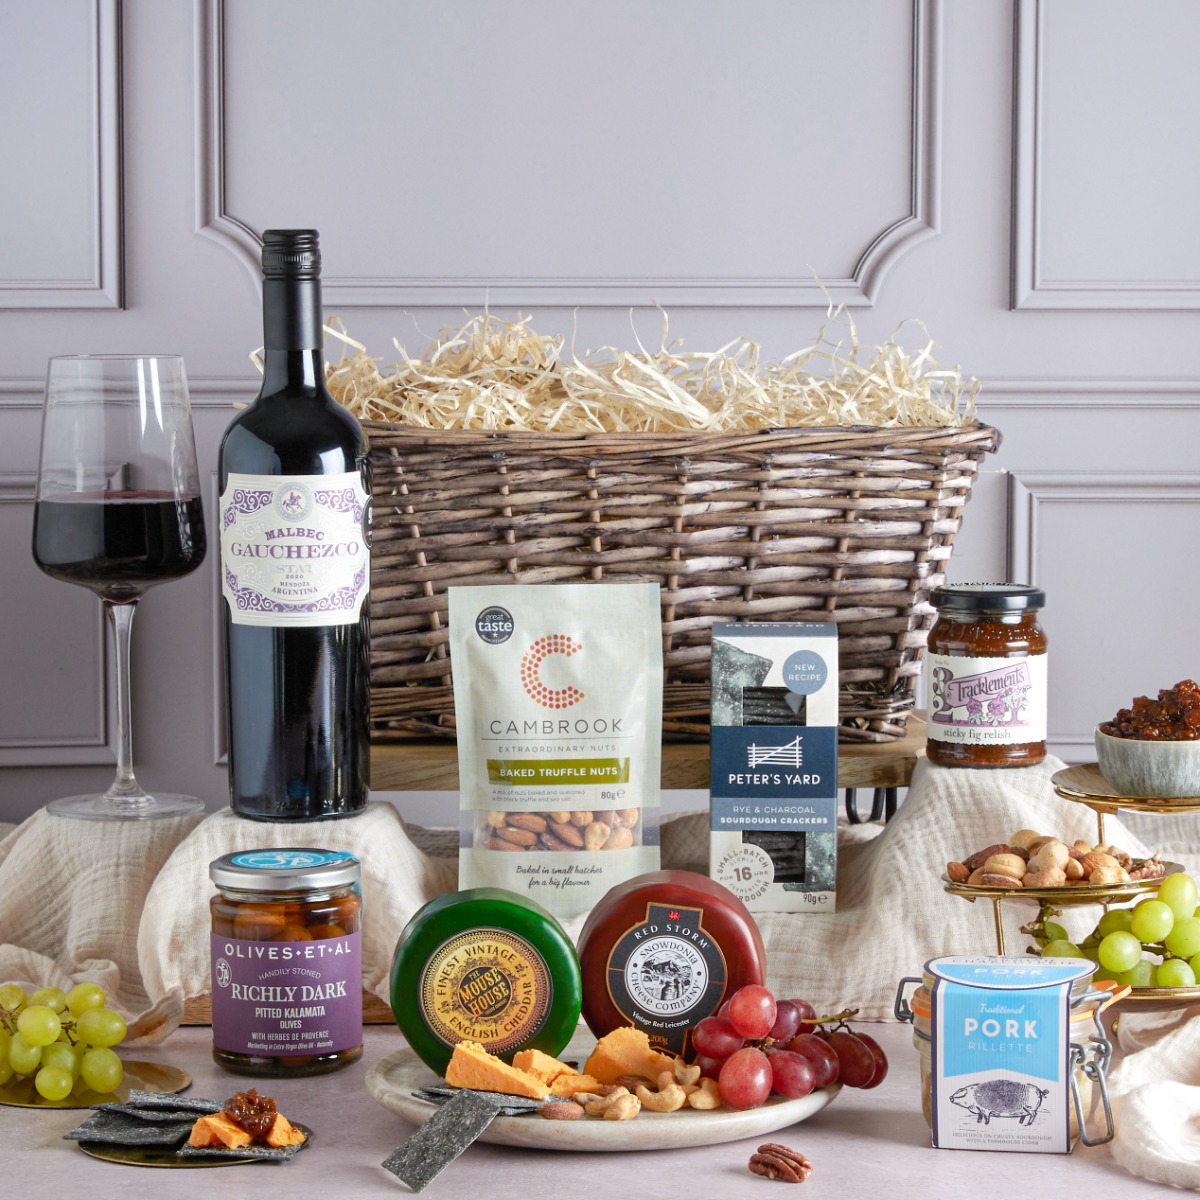 Luxury Wine, Cheese & Rillette Hamper with contents on display as a Father's Day wine gift suggestion